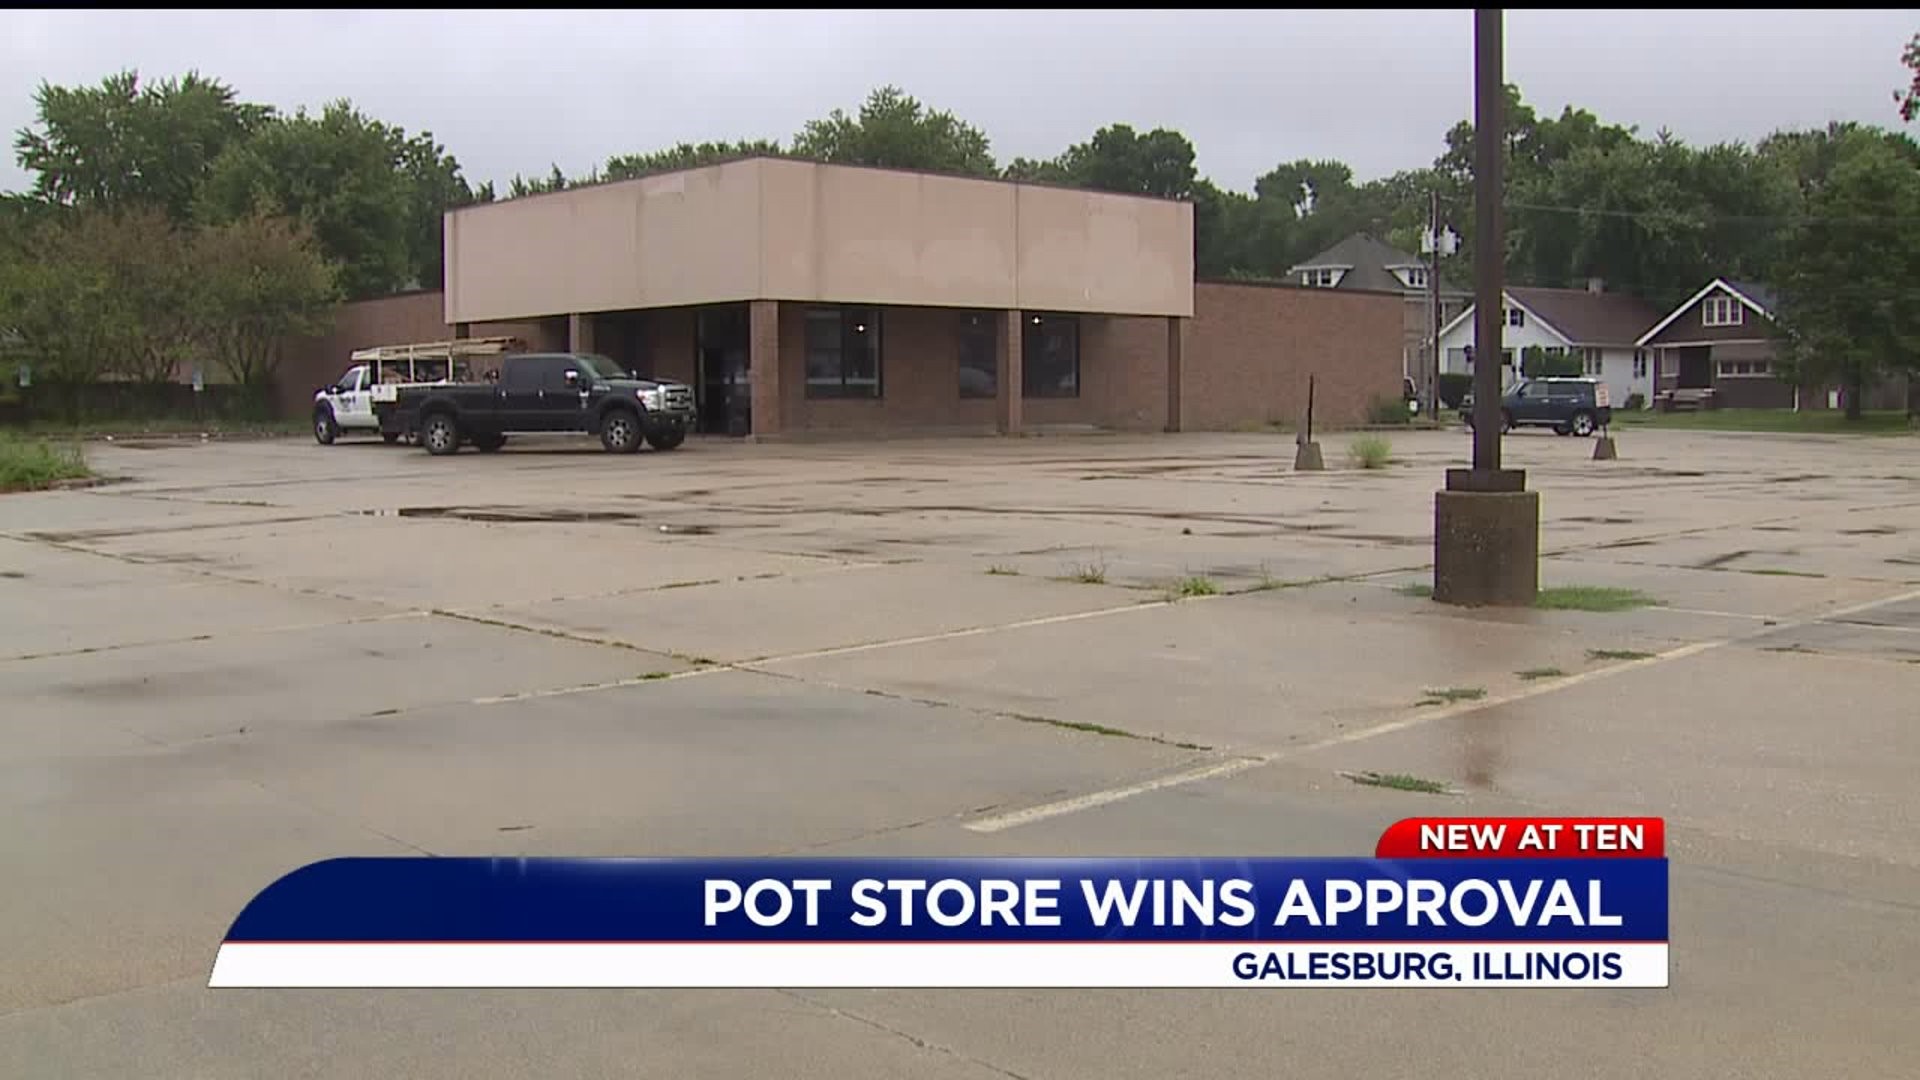 GALESBURG APPROVES POT STORE LOCATION